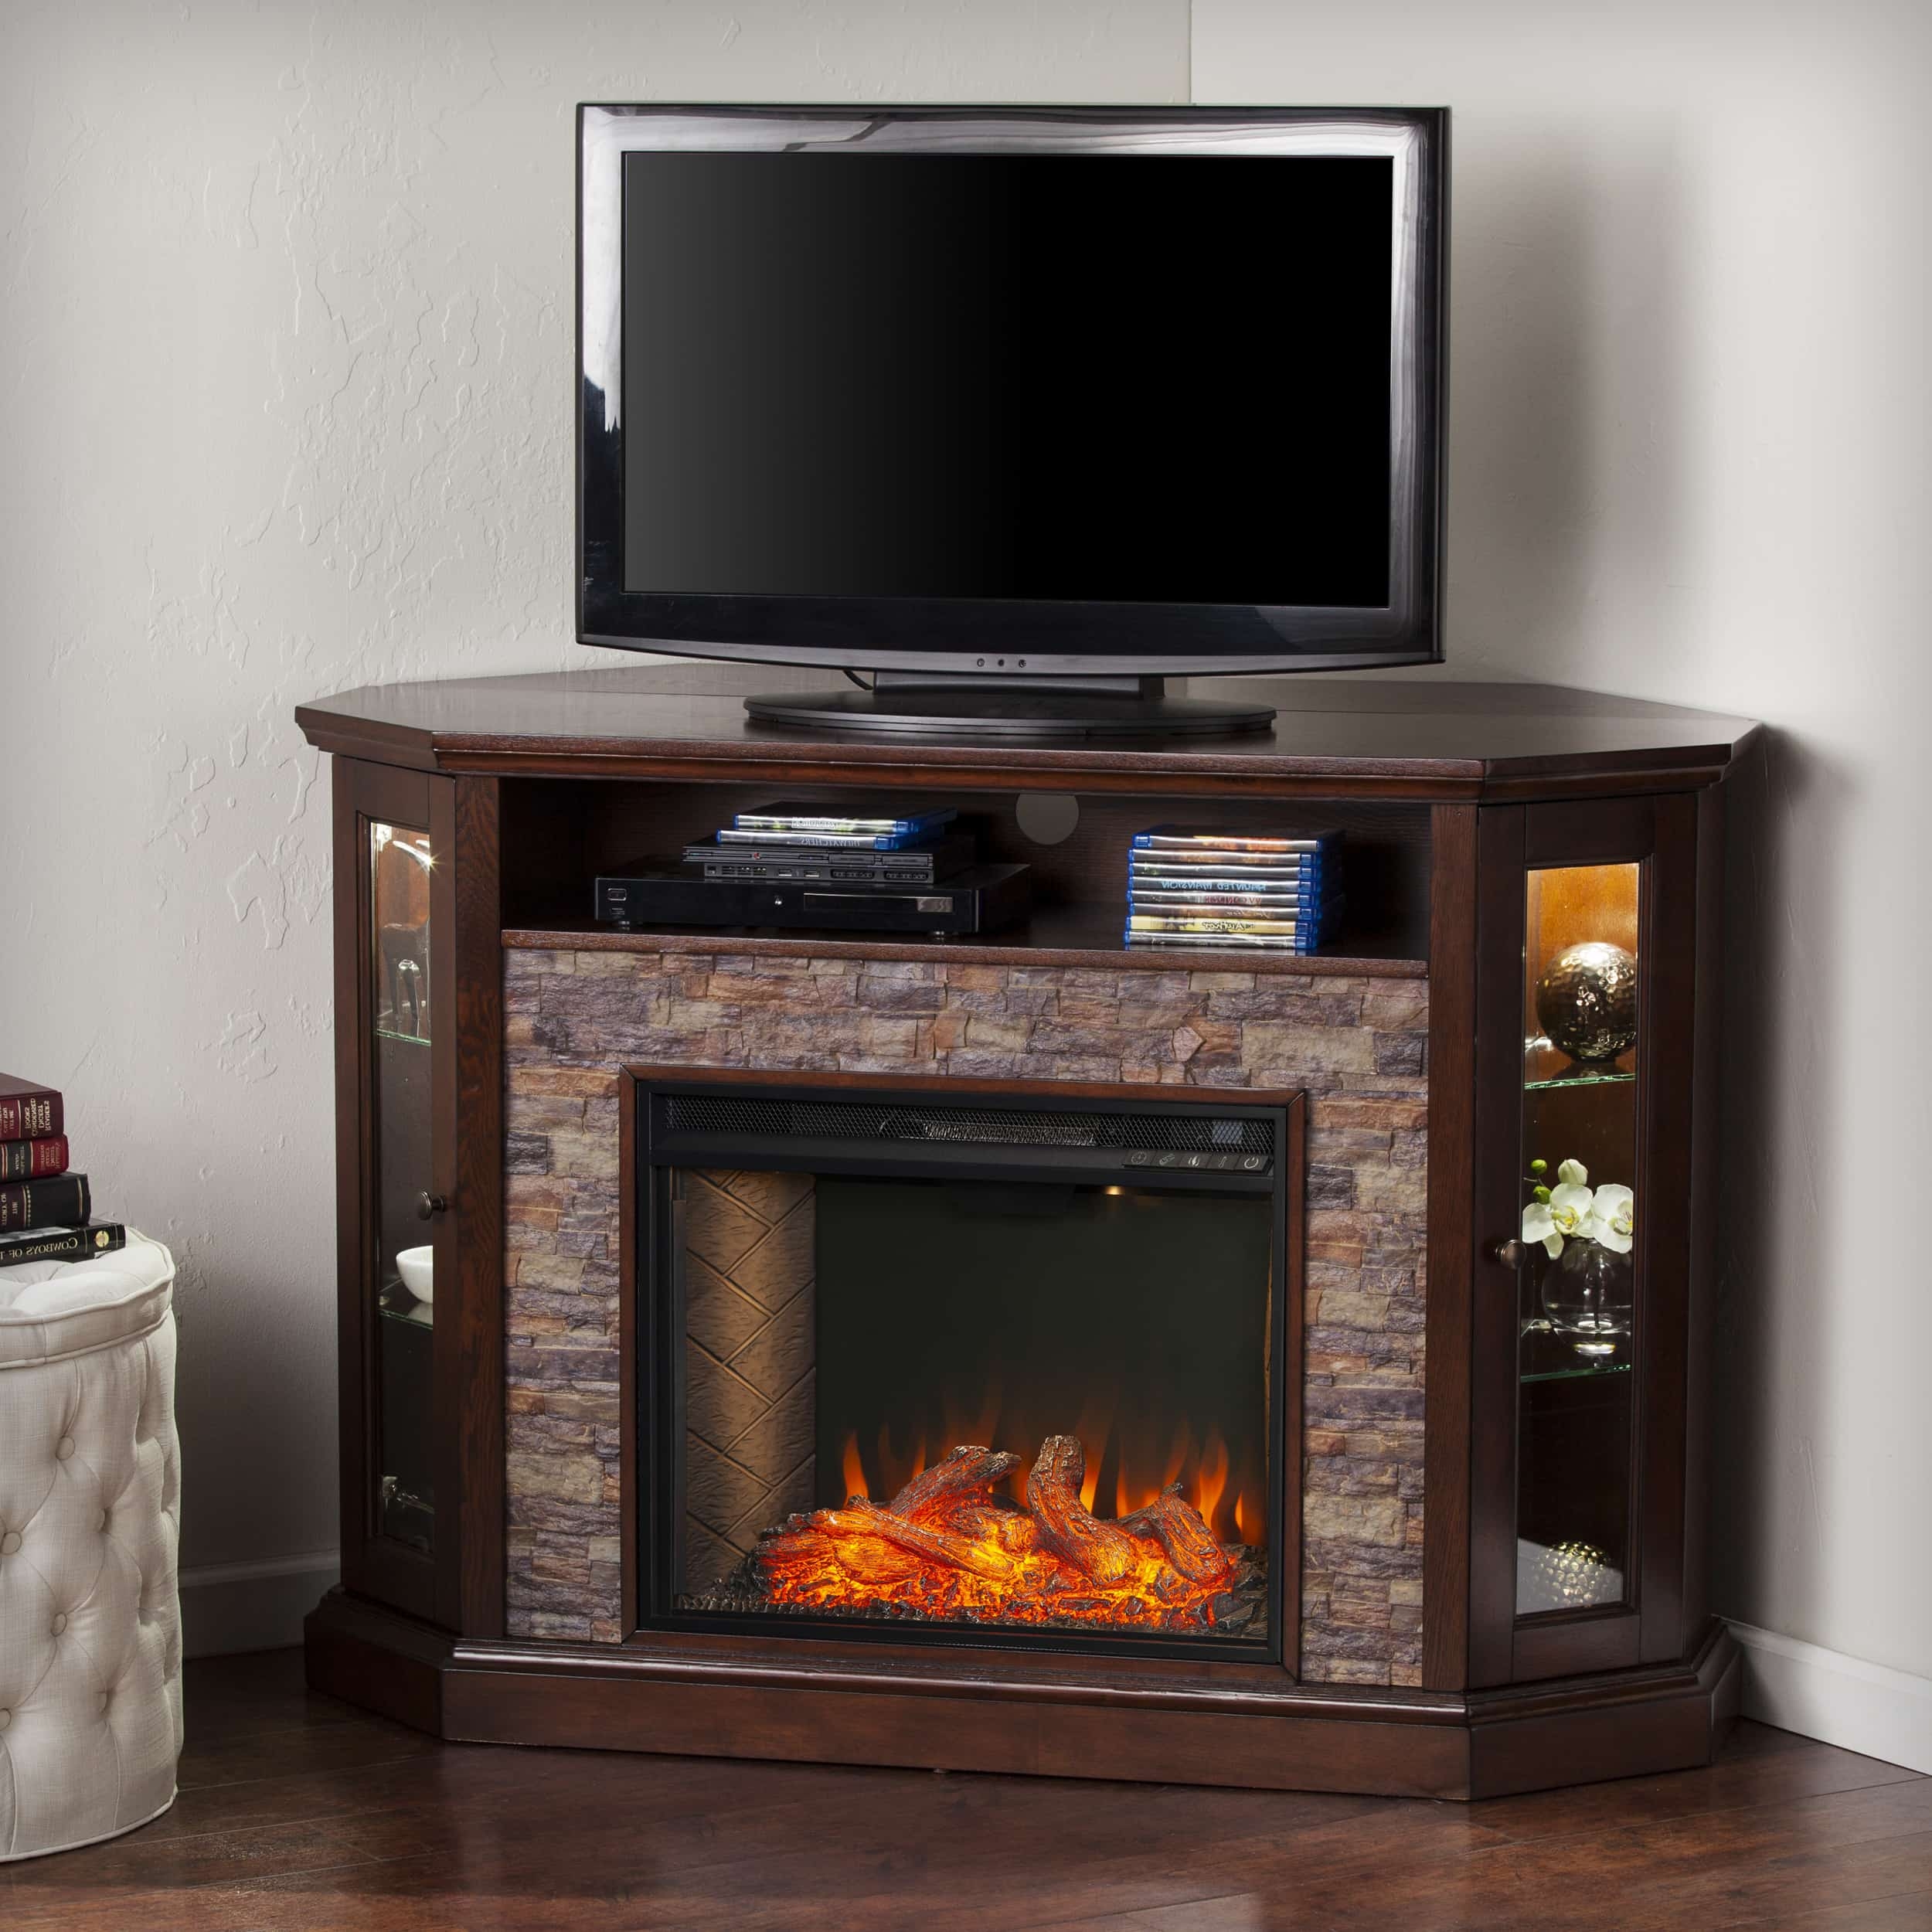 Electric fireplace tv stand home depot